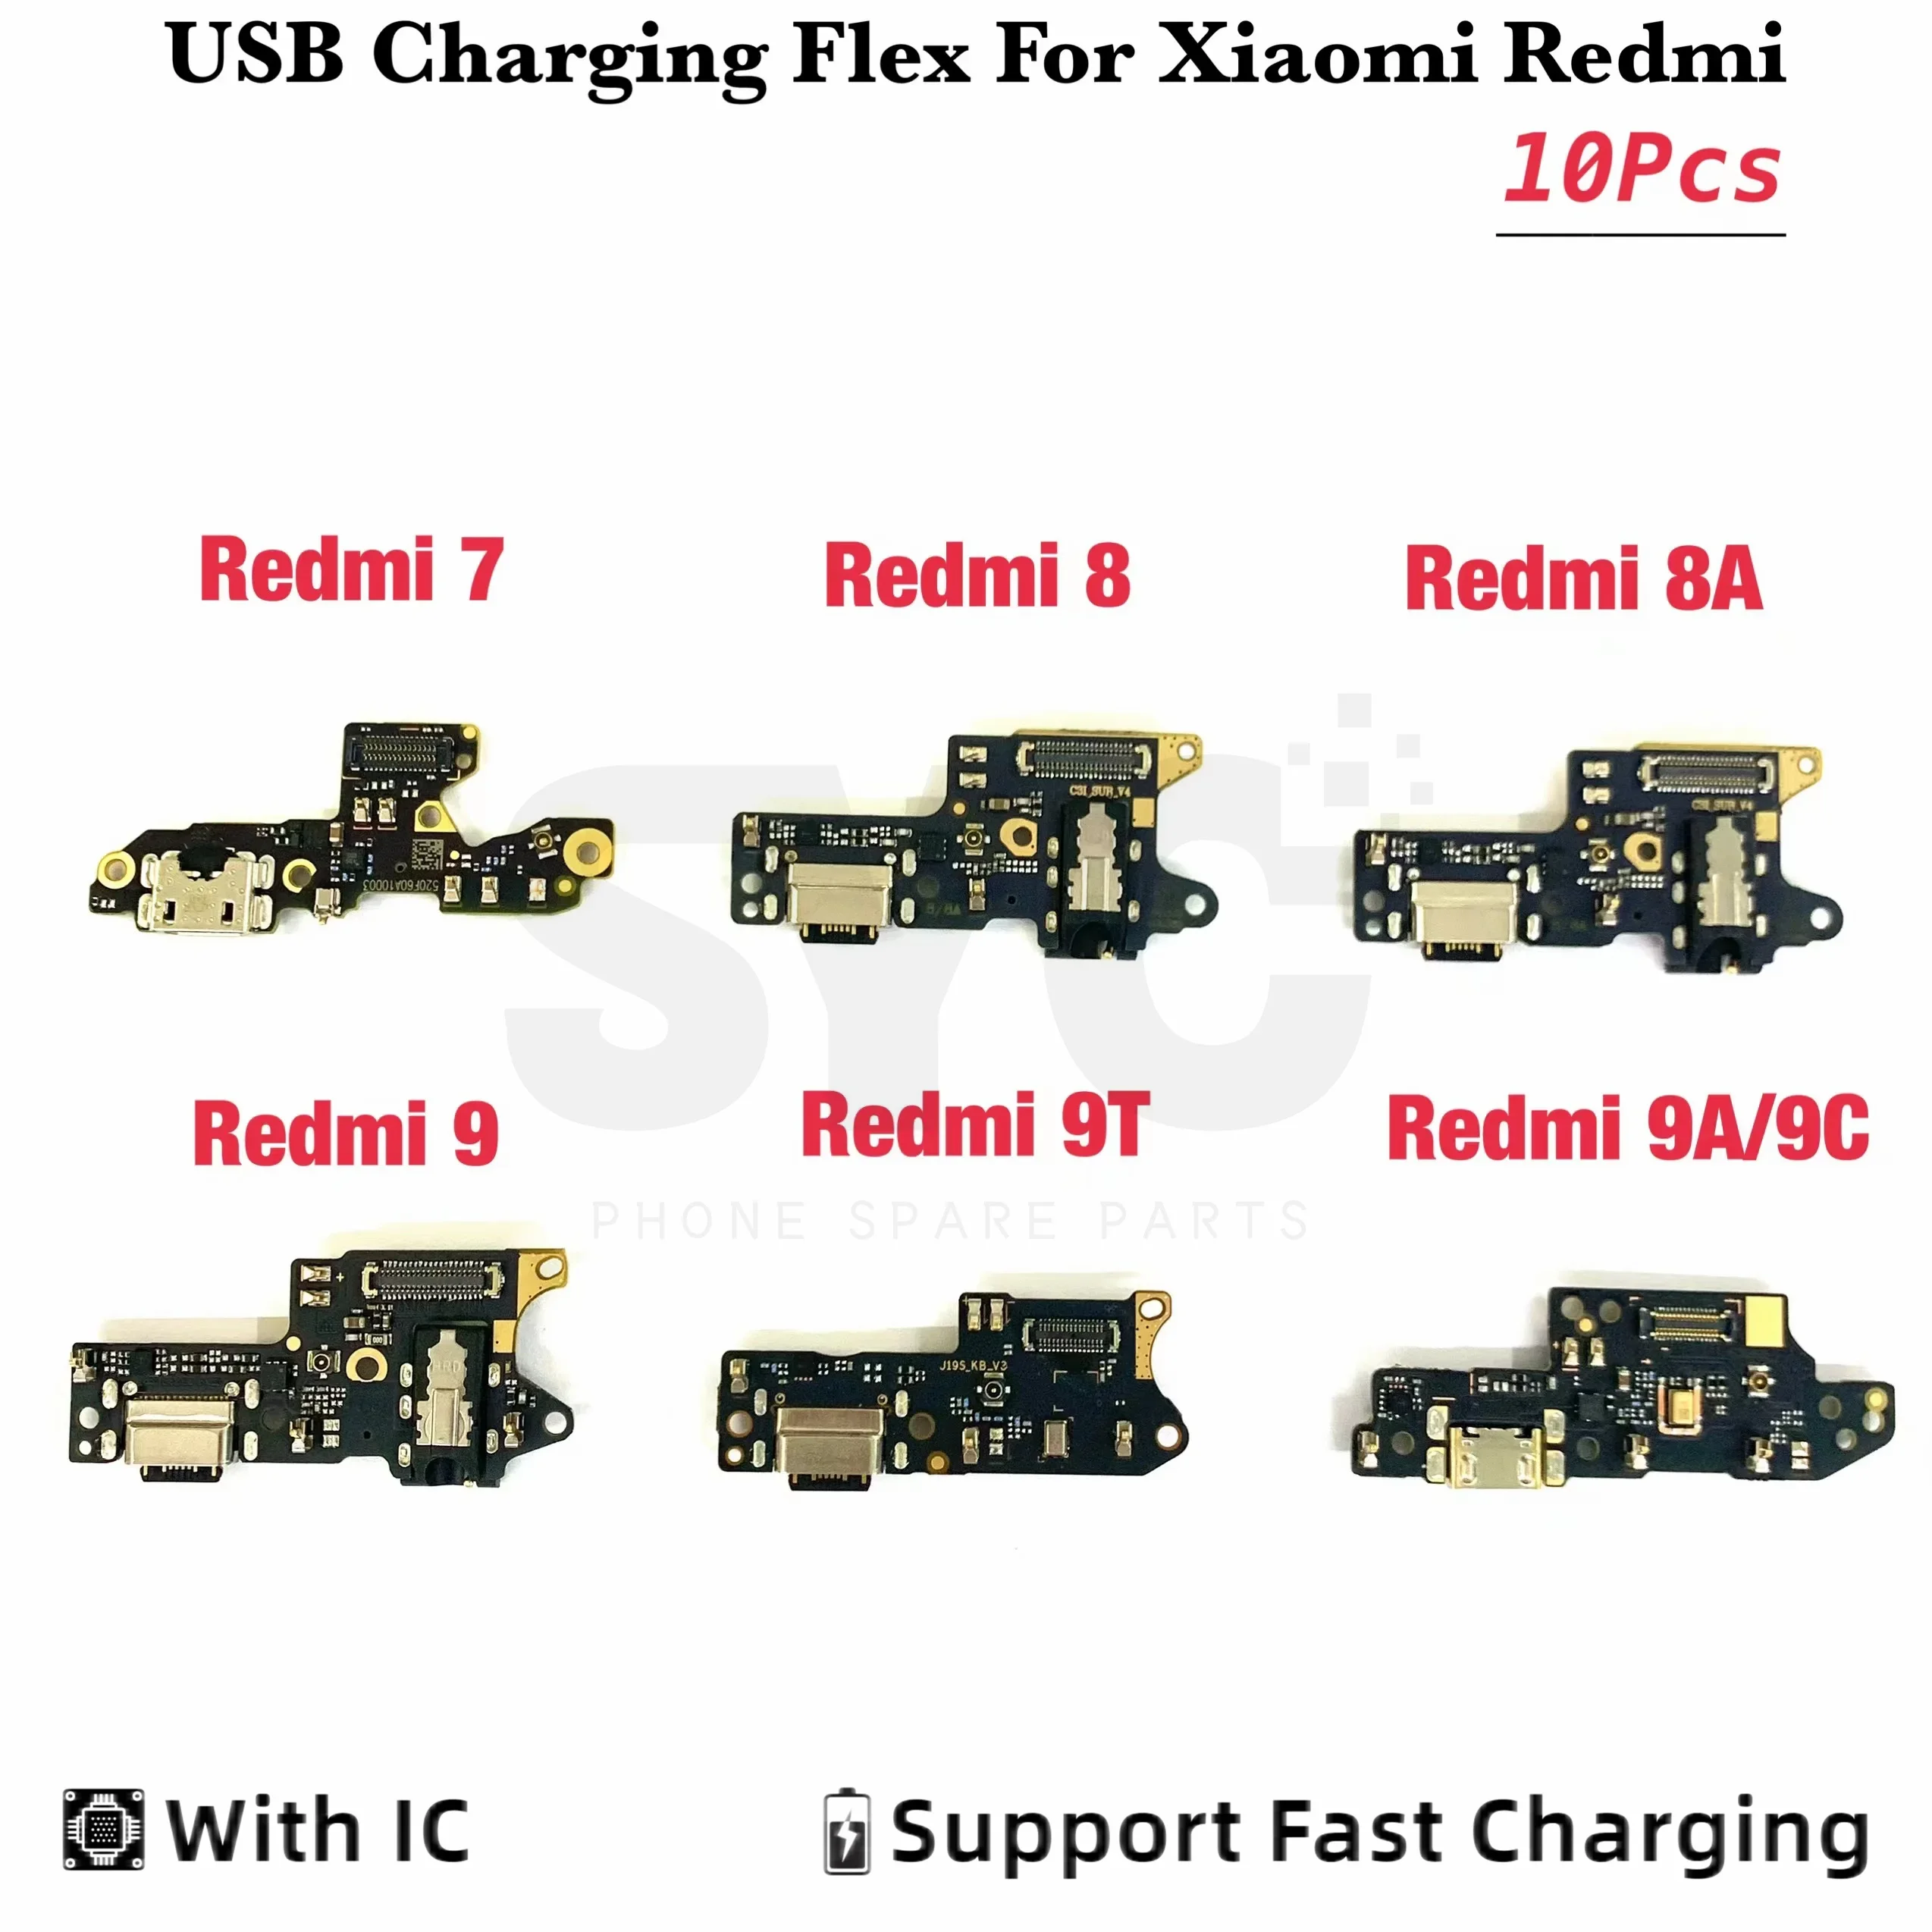 

10Pcs New USB Charging Port Connector Flex Cable With Microphone Mic For XiaoMi Redmi 6 7 8 8A 9 9A 9C Redmi 10 10C 10Prime